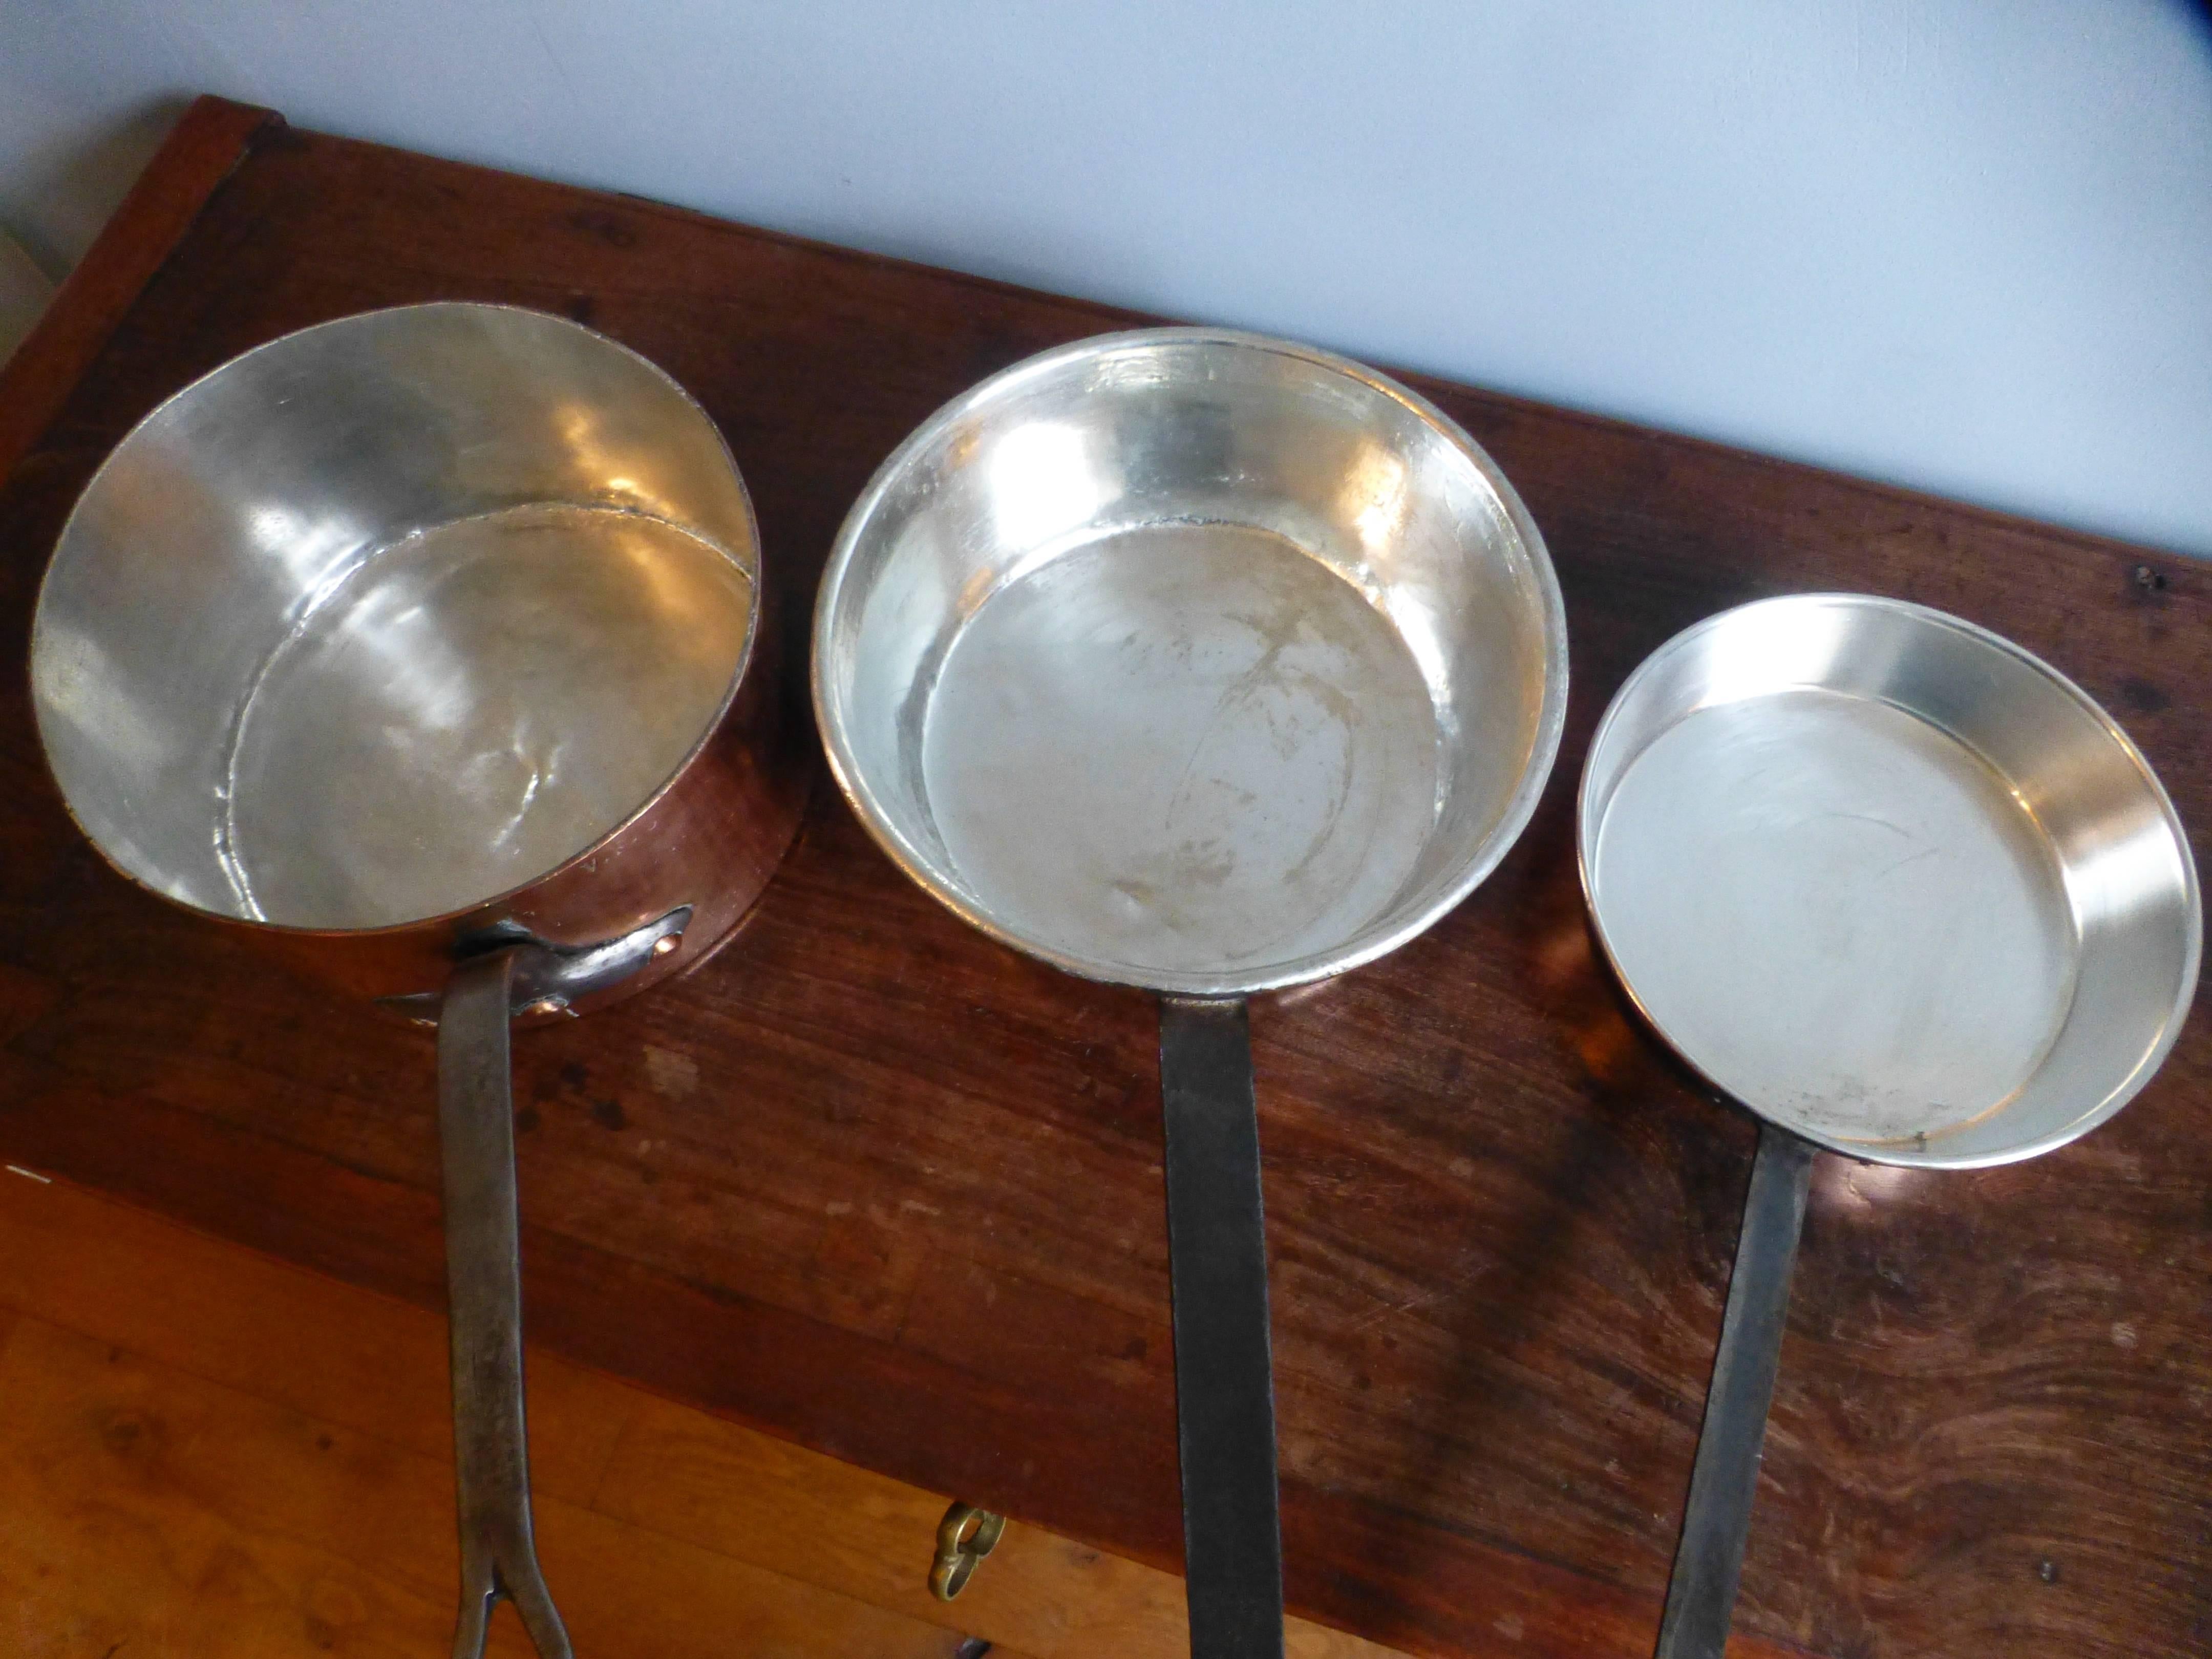 Set of Three Re-Tinned Copper Pots, Copper Pans 1